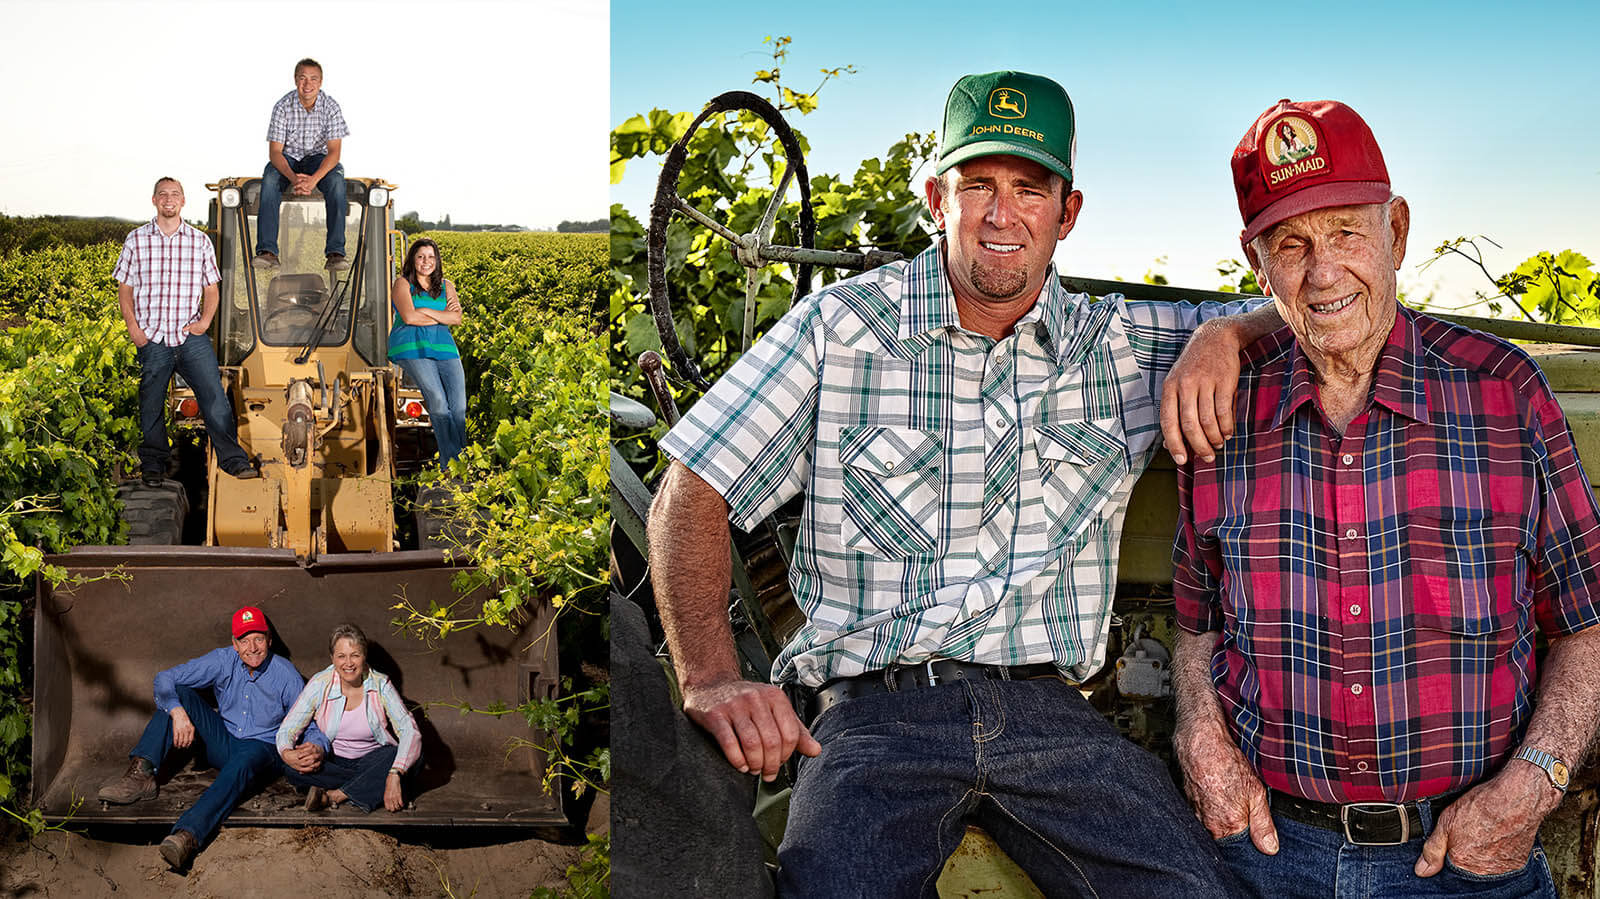 A collection of the faces of Sun-Maid growers. Left side: growers sitting on a tractor. Right side: up-close shot of two men smiling.